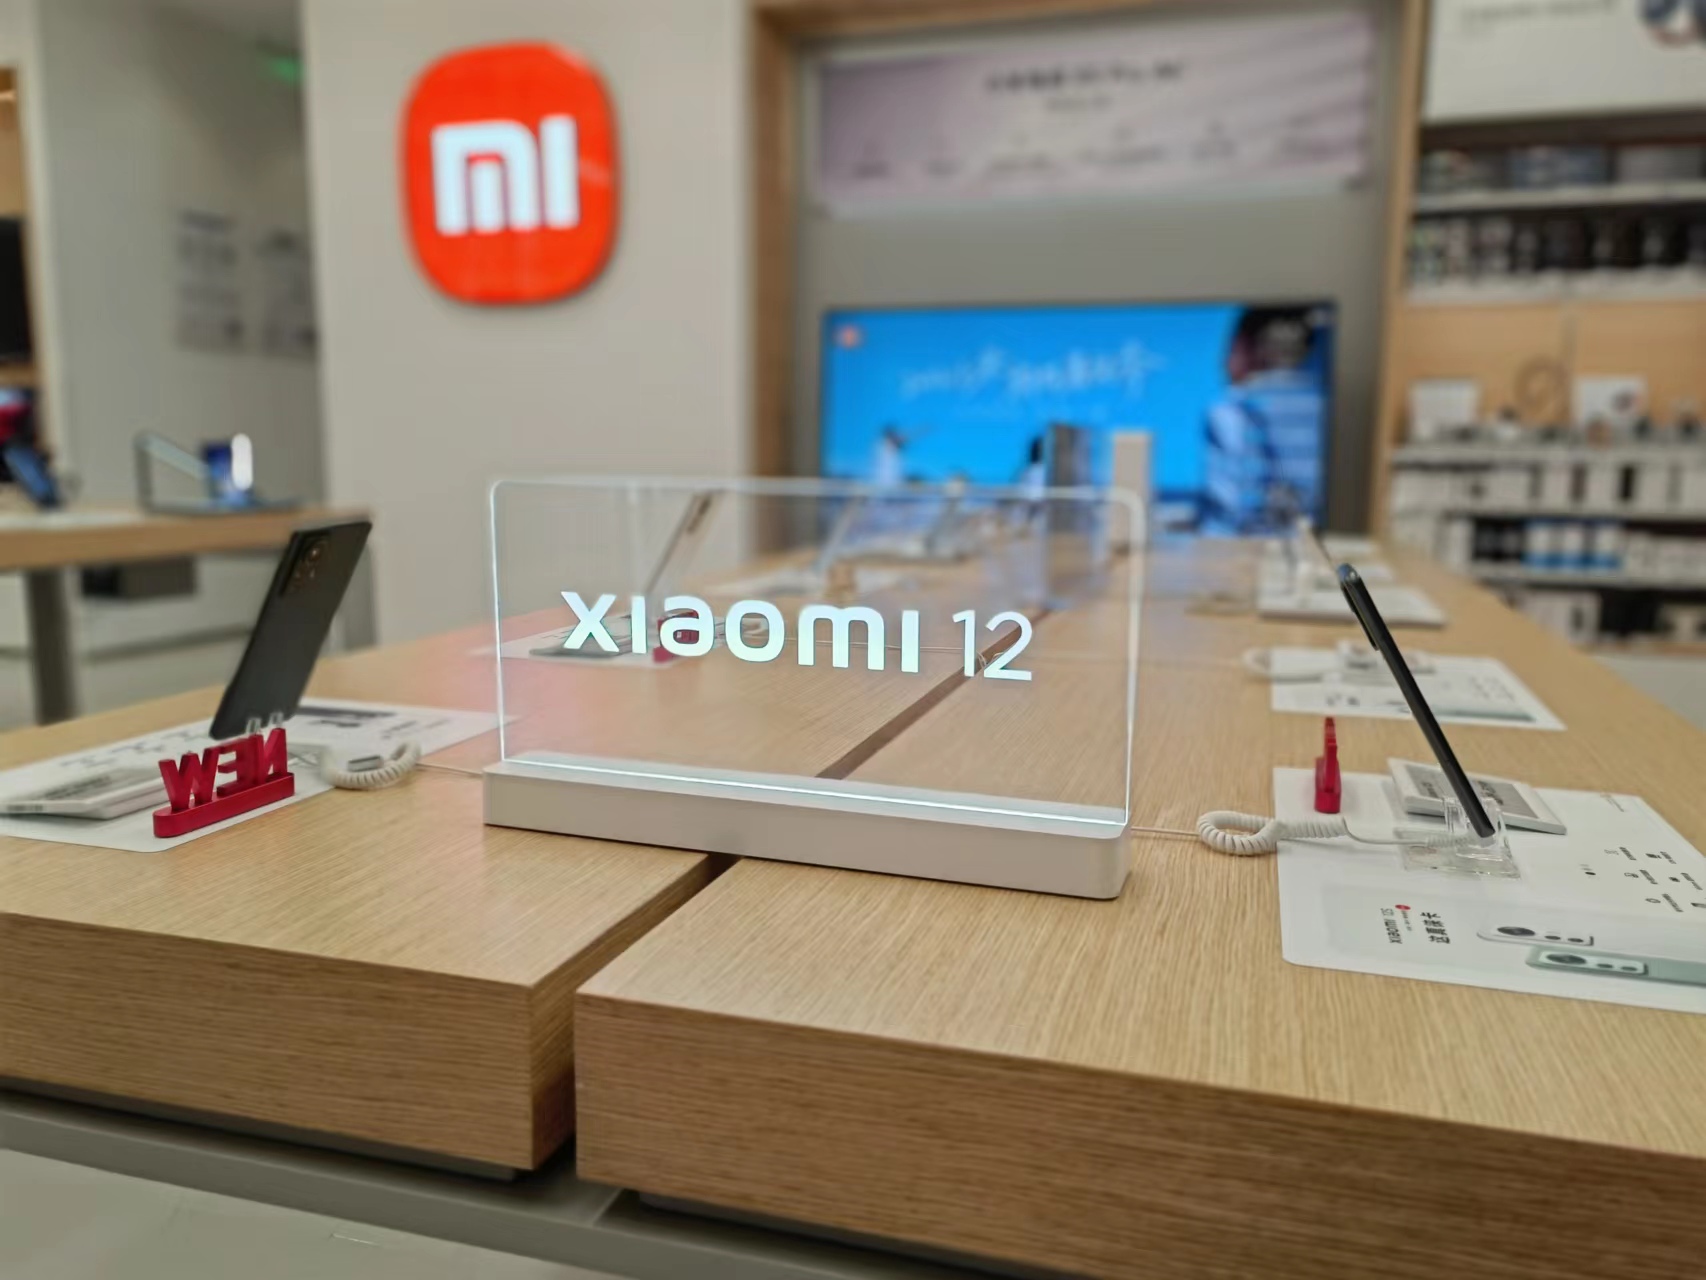 BoM Analysis: Xiaomi’s 12S Ultra Costs $516 After Camera, SoC, Display Upgrades to 11 Ultra